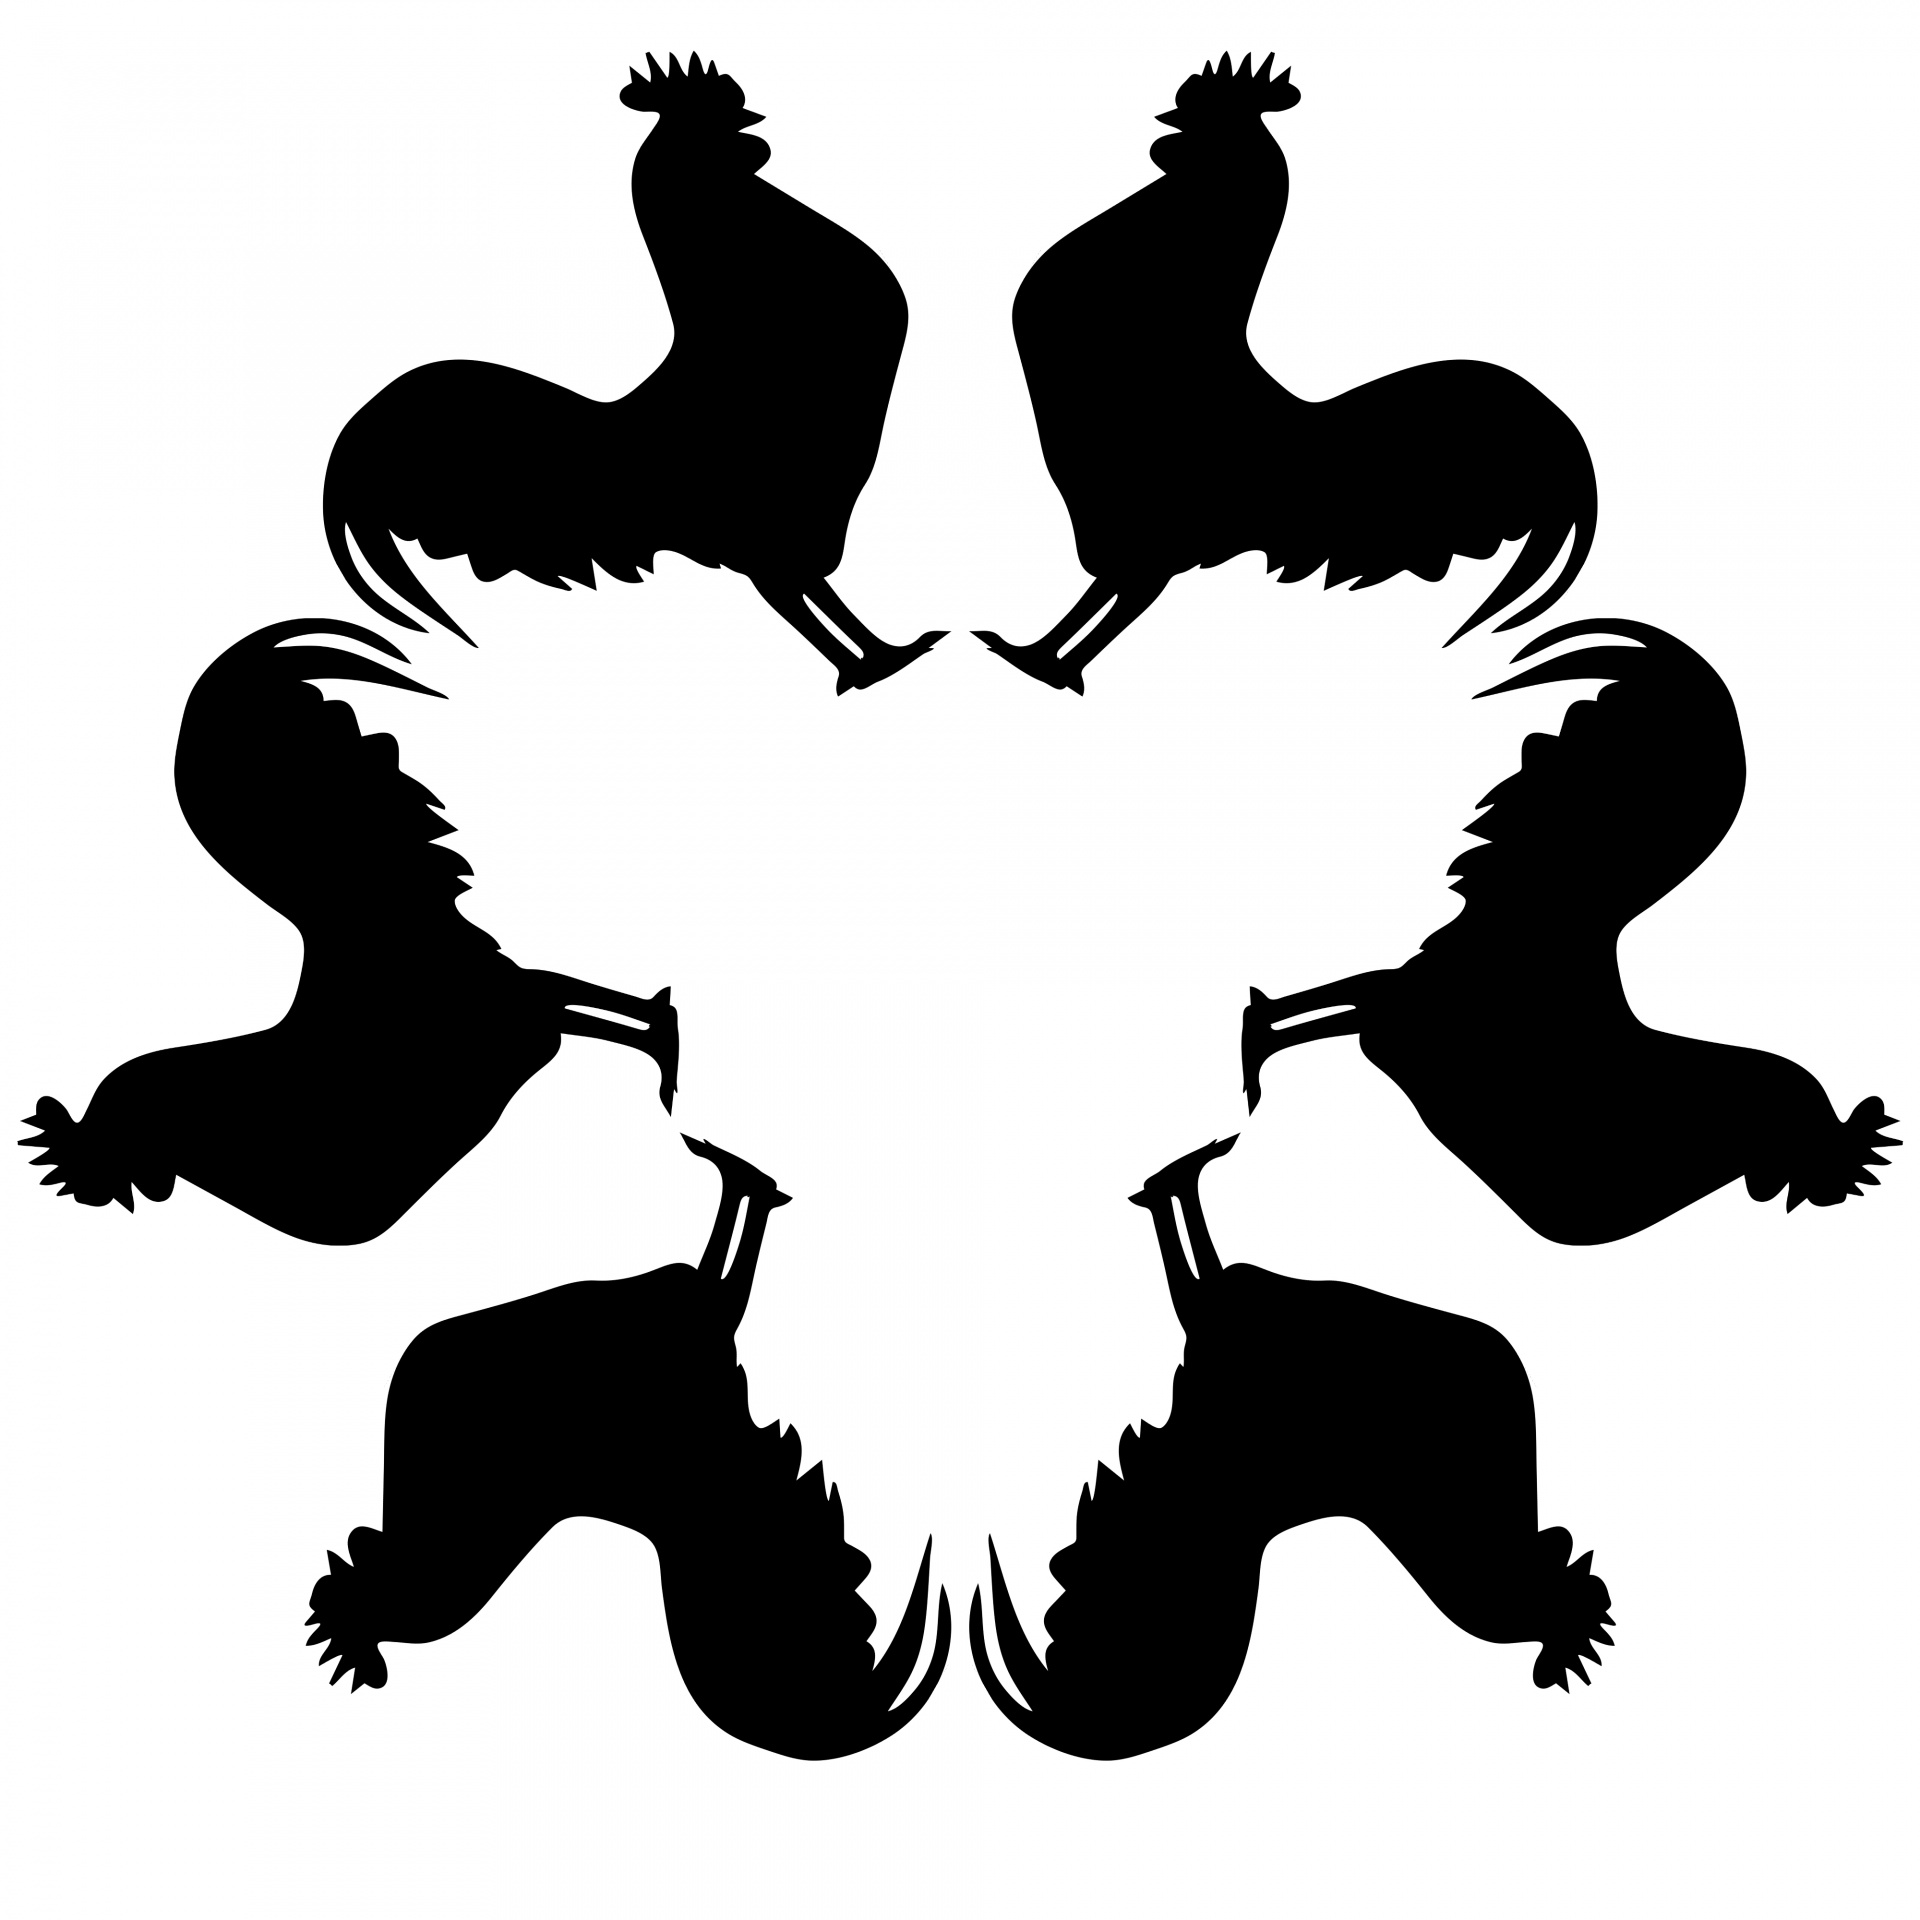 kaleidoscope rooster silhouette free photo